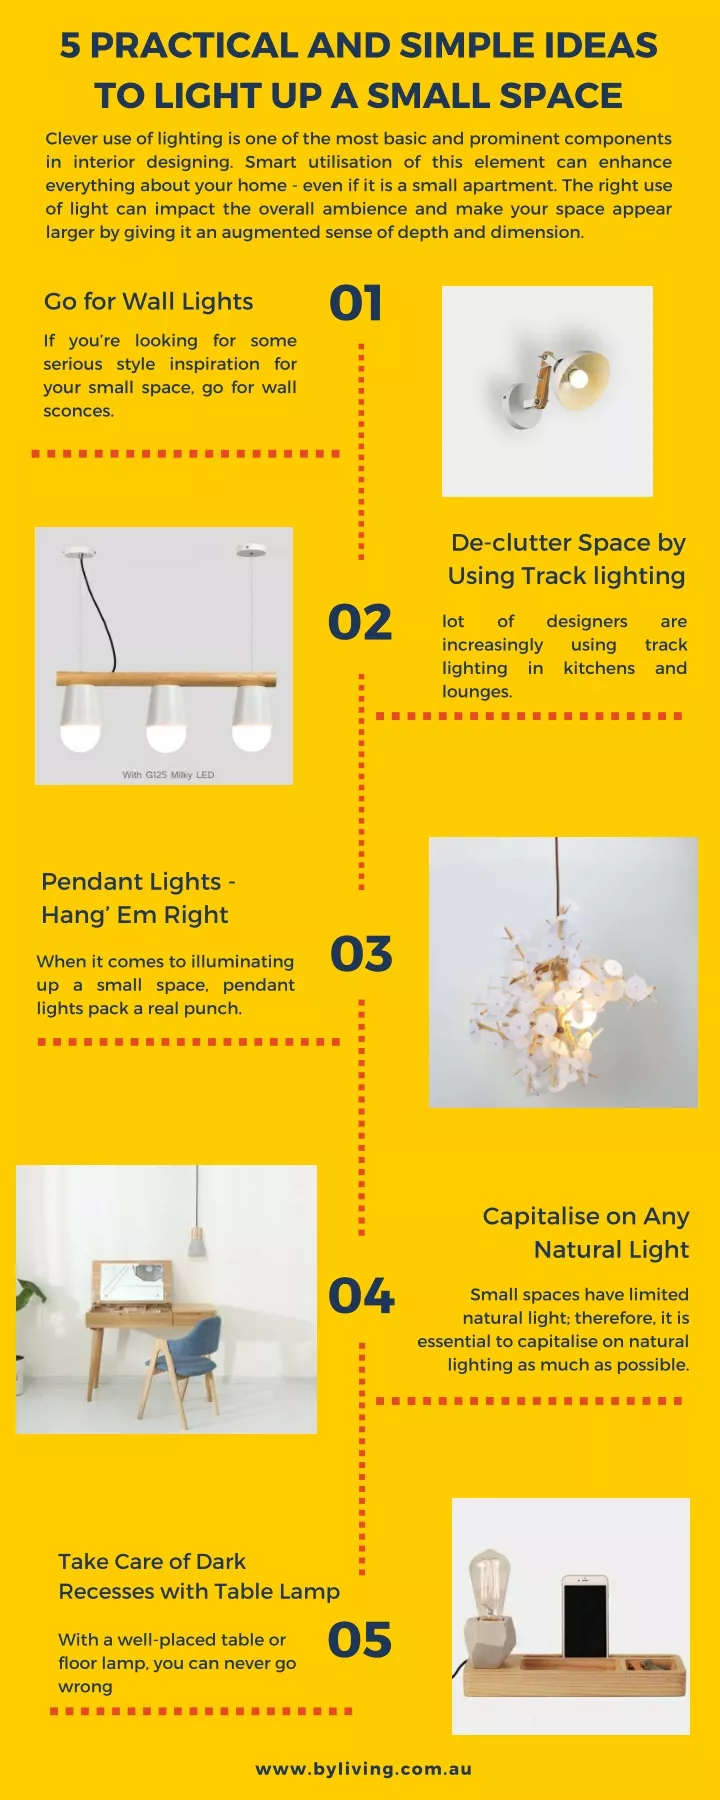 5 practical and simple ideas to light up a small